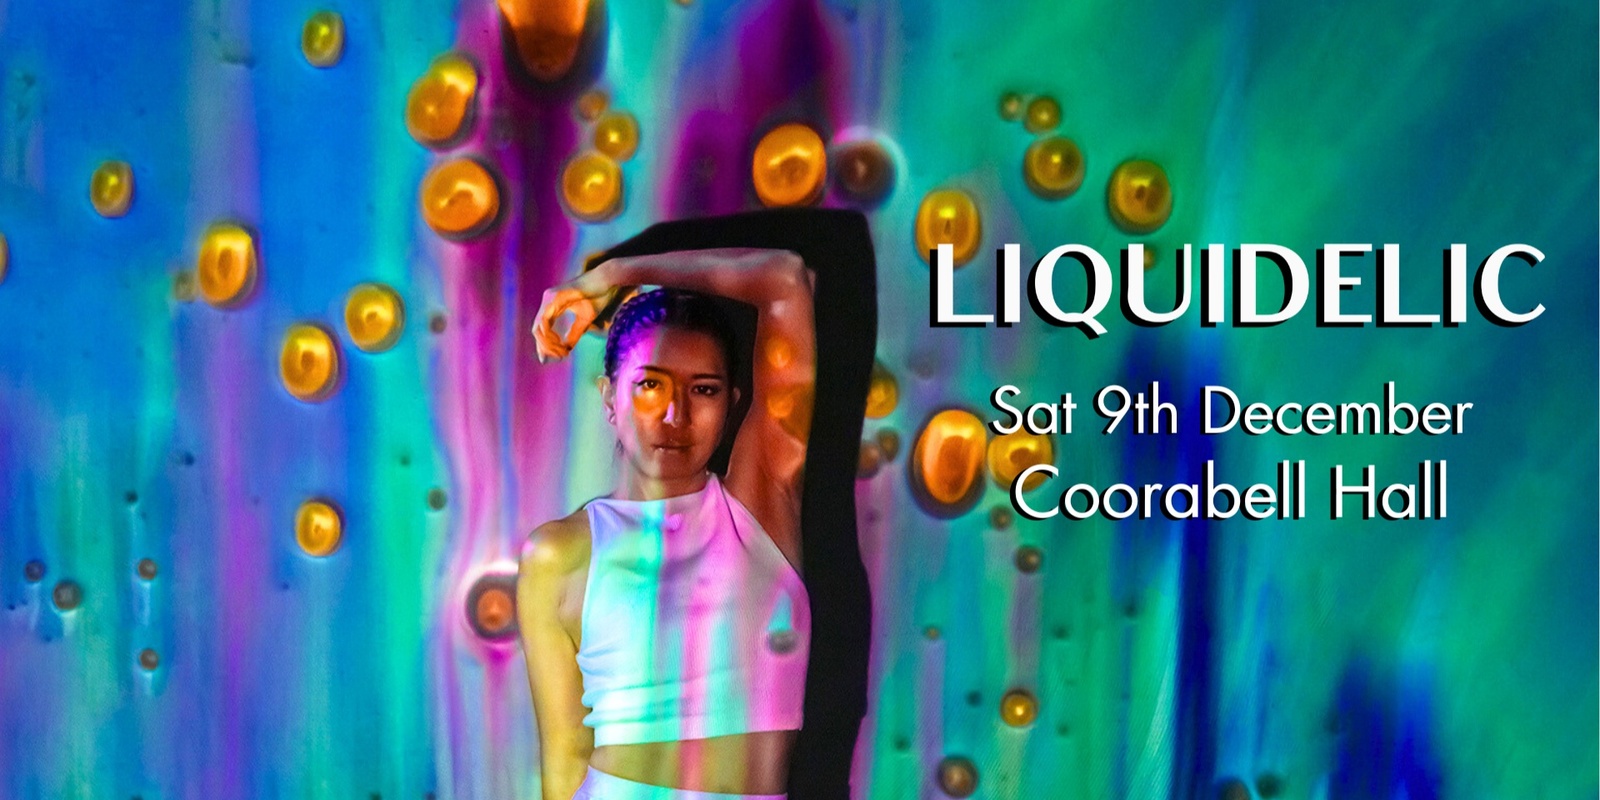 Banner image for Liquidelic at Coorabell Hall